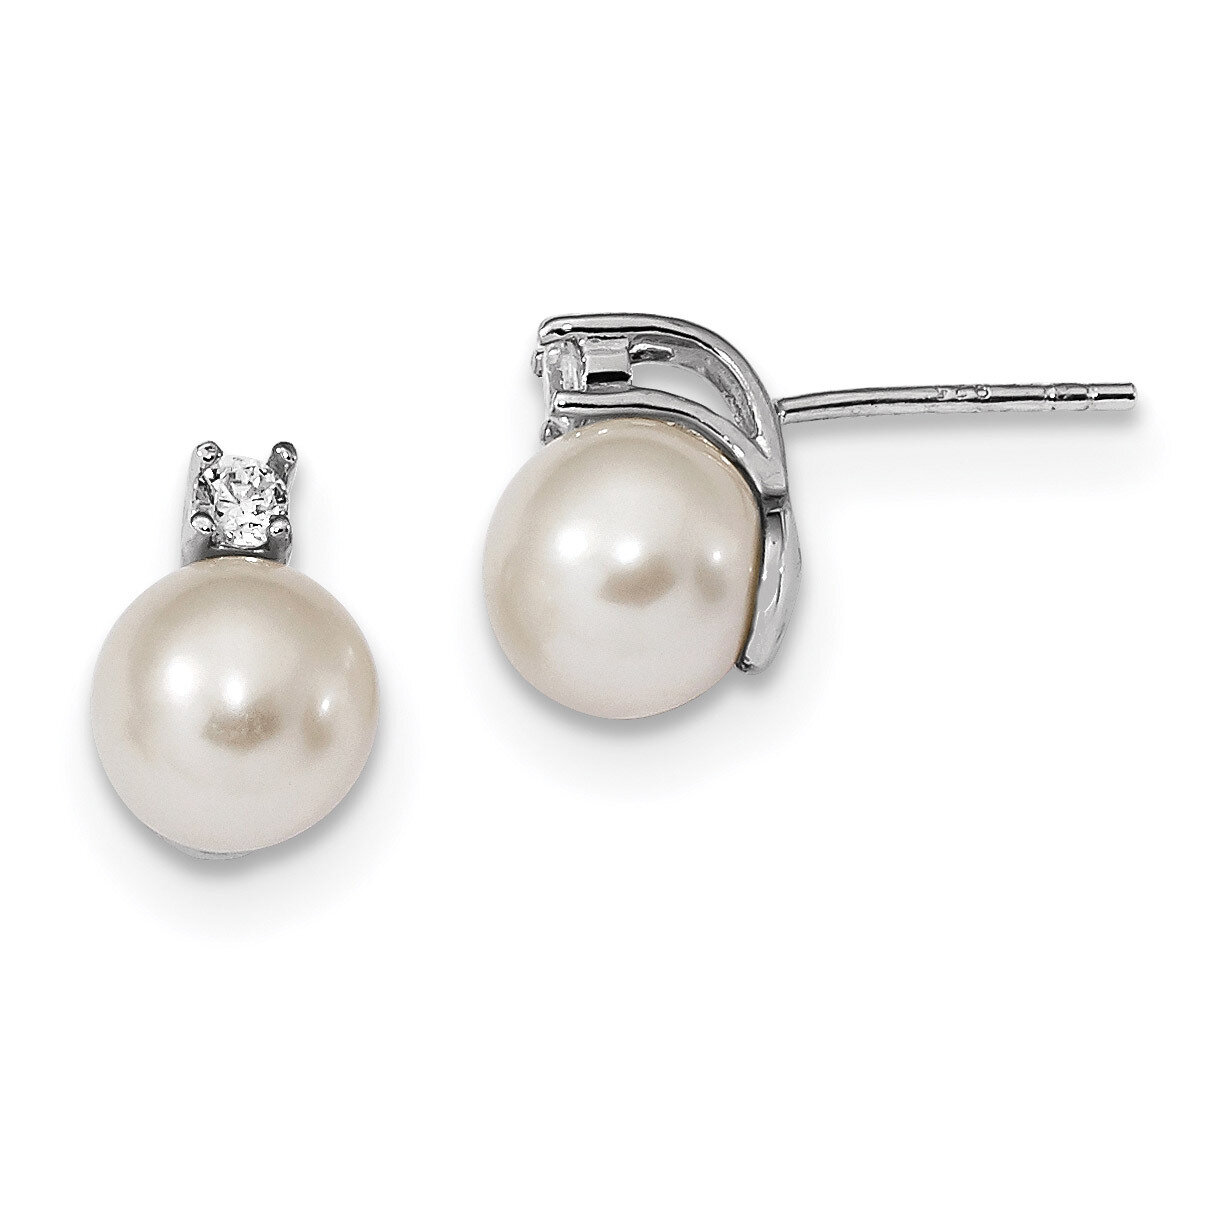 8-9mm White Round Cultured Freshwater Pearl CZ Diamond Post Earrings Sterling Silver Rhodium-plated QE13864